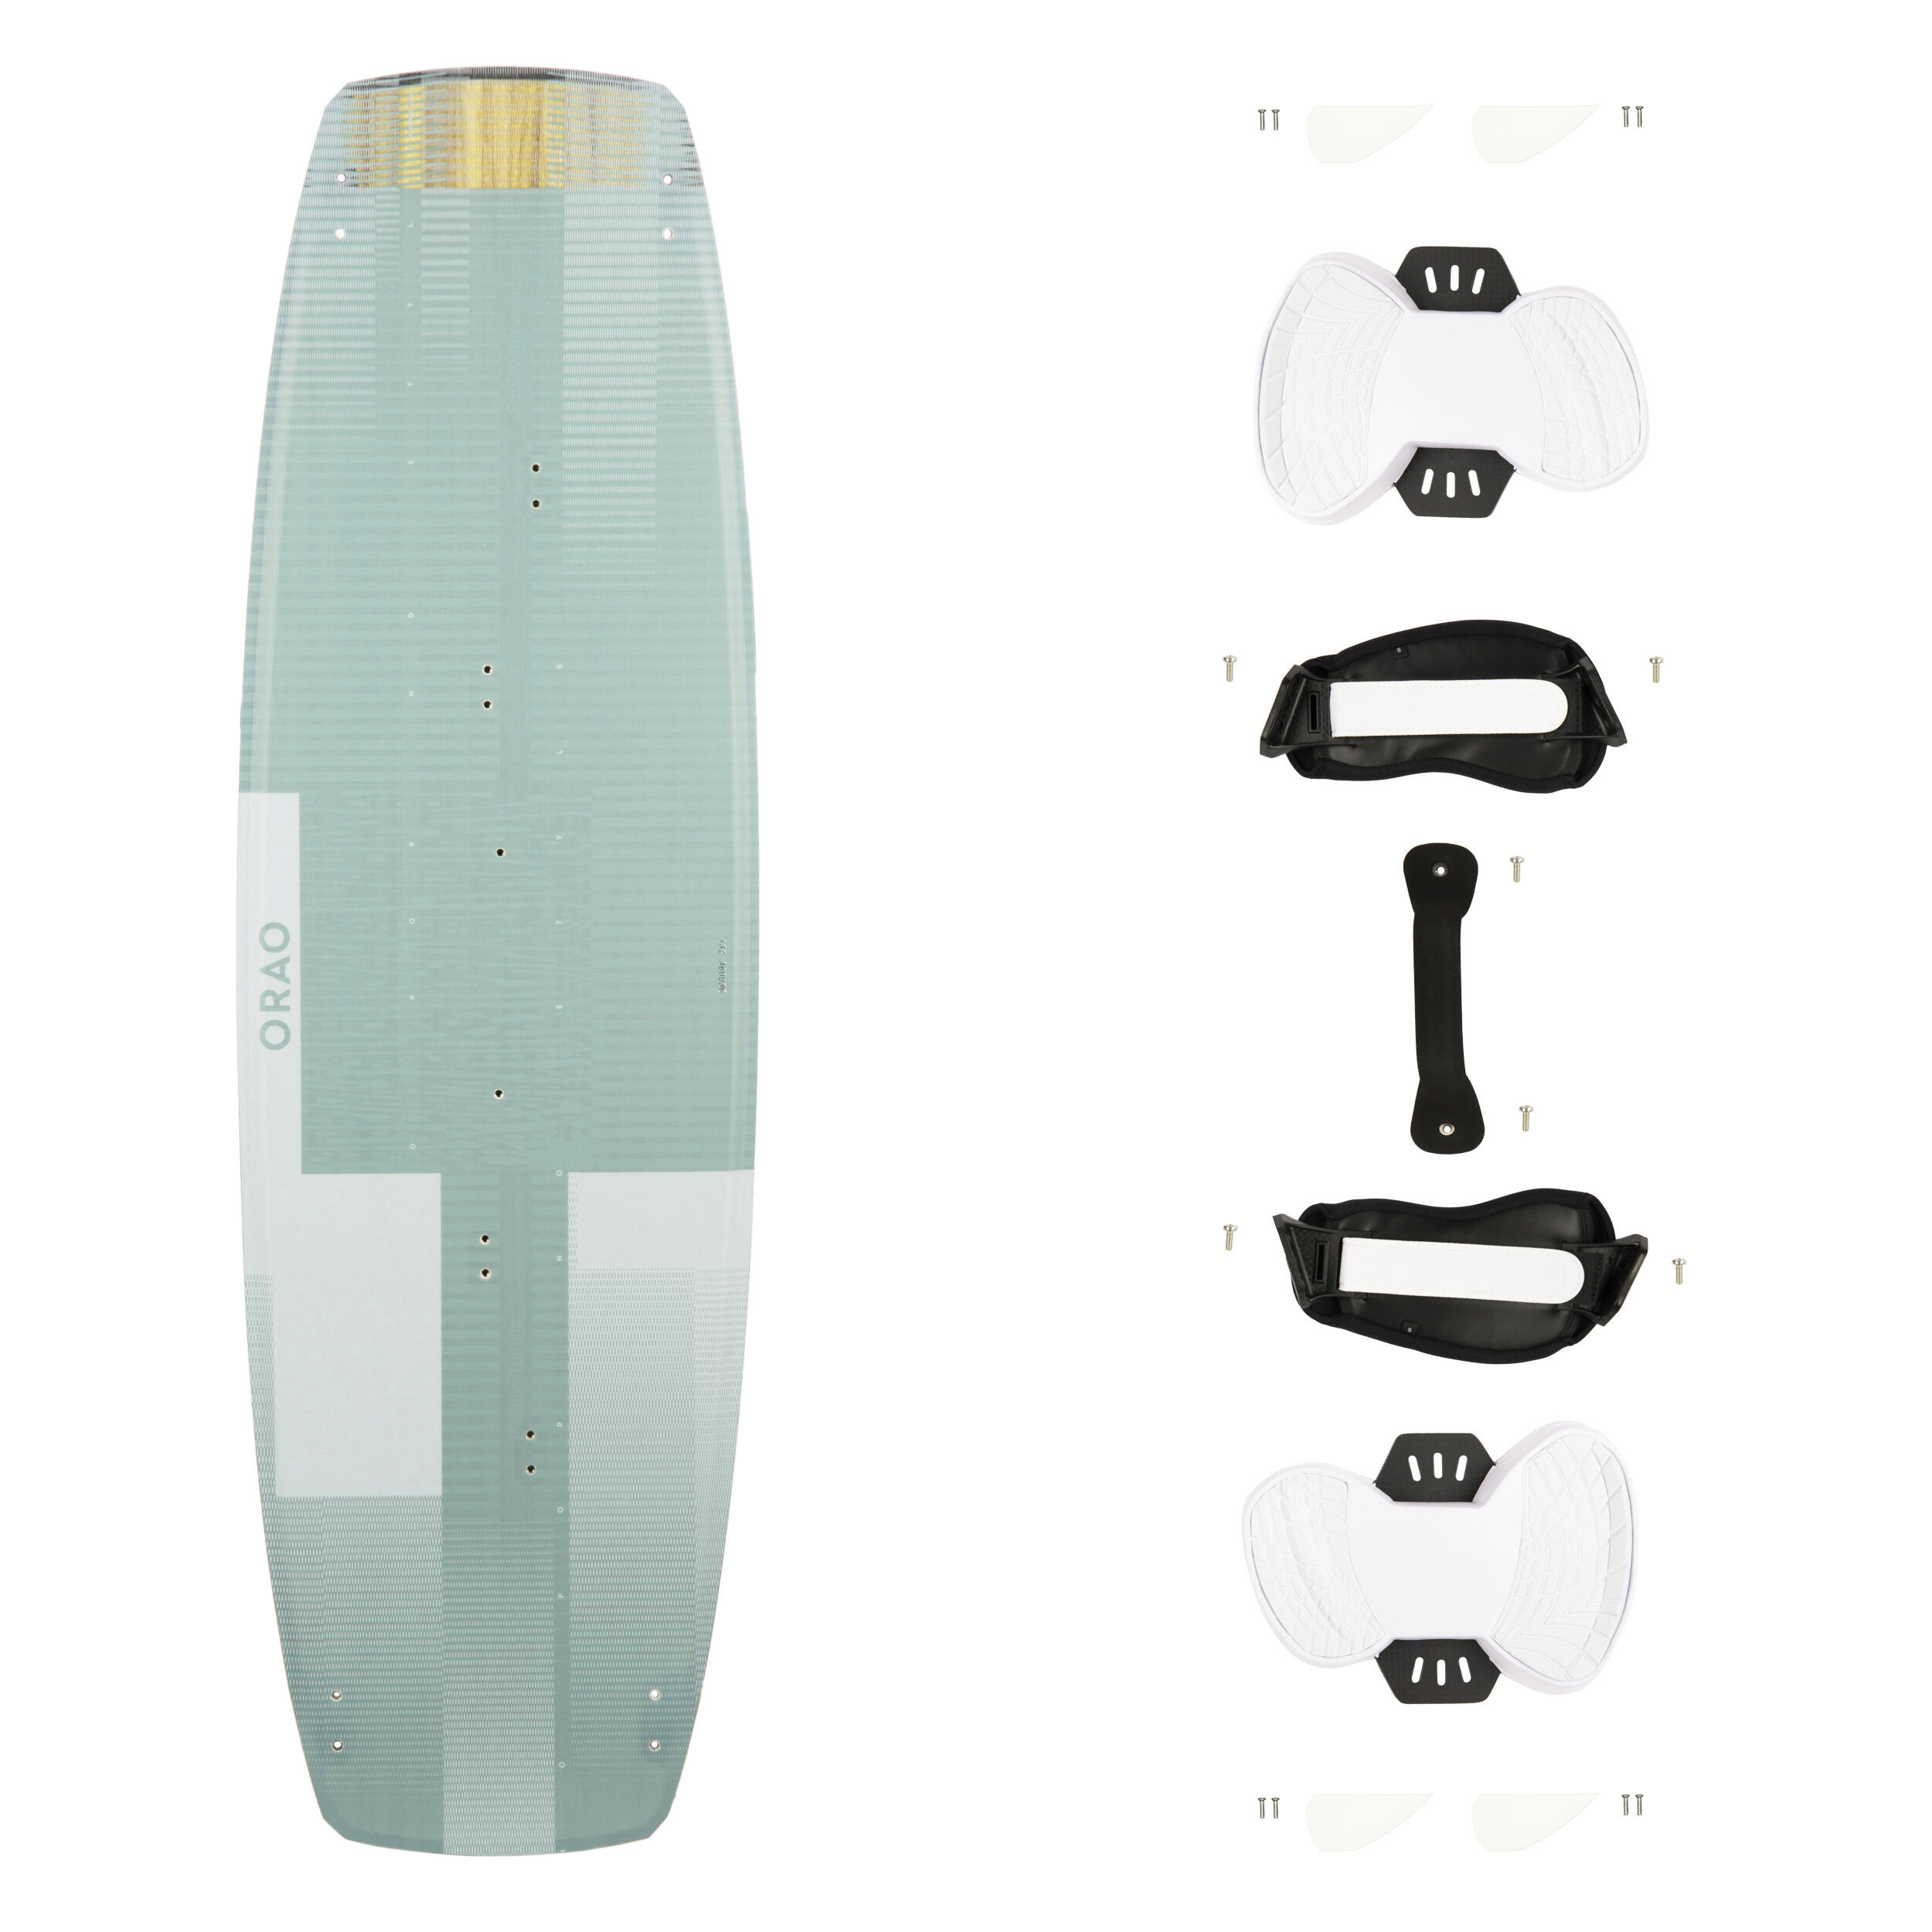 ORAO KITESURFING BOARD “TWIN-TIP 500" - CARBON - 132X39 CM (PADS AND STRAPS INCLUDED)